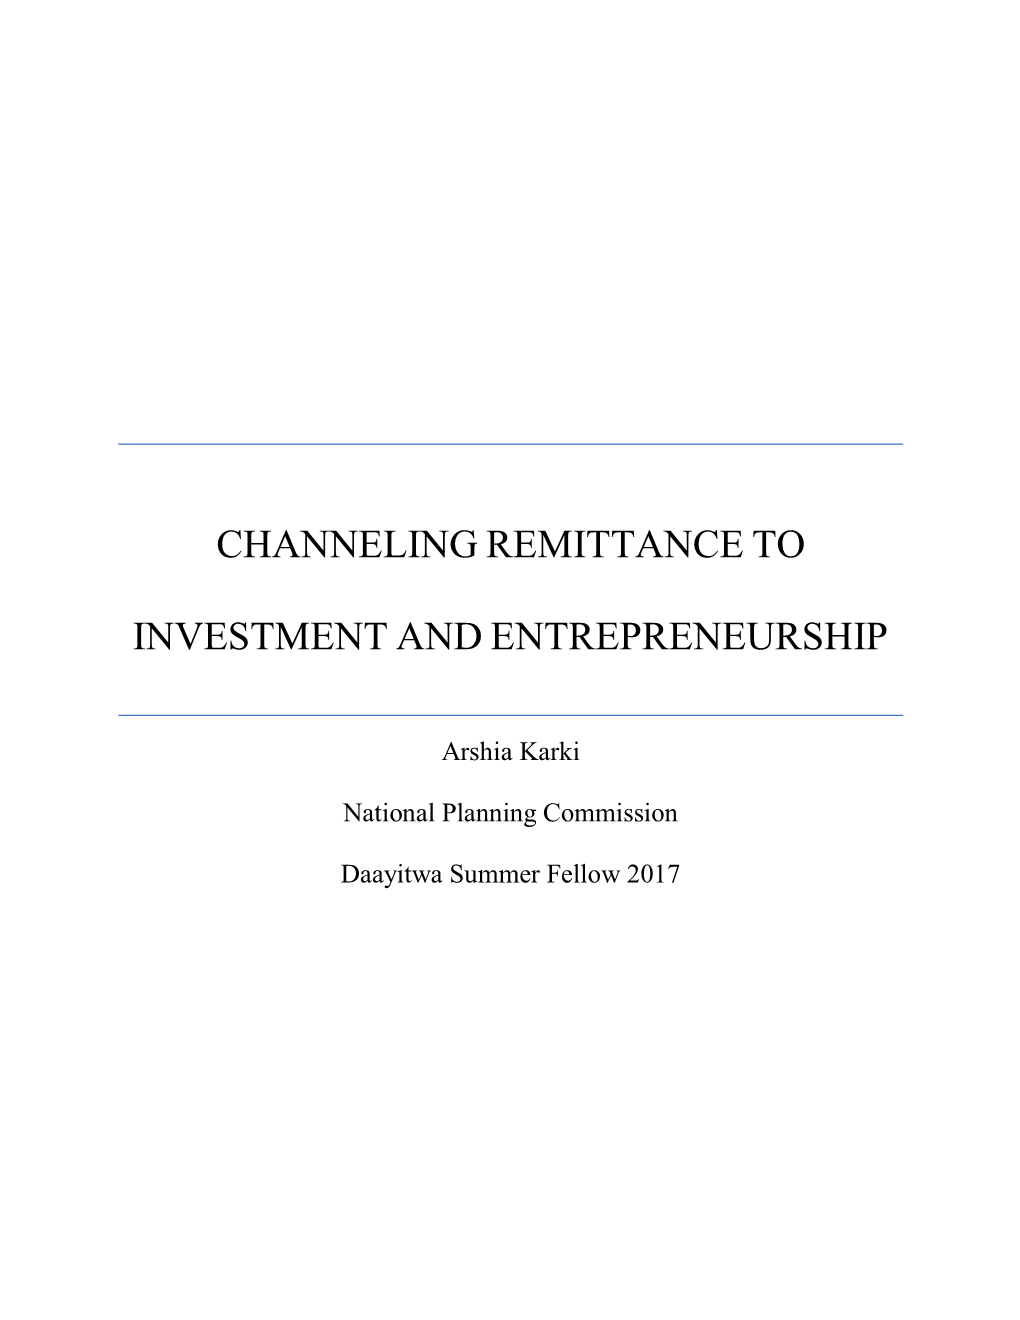 Channeling Remittance to Investment and Entrepreneurship